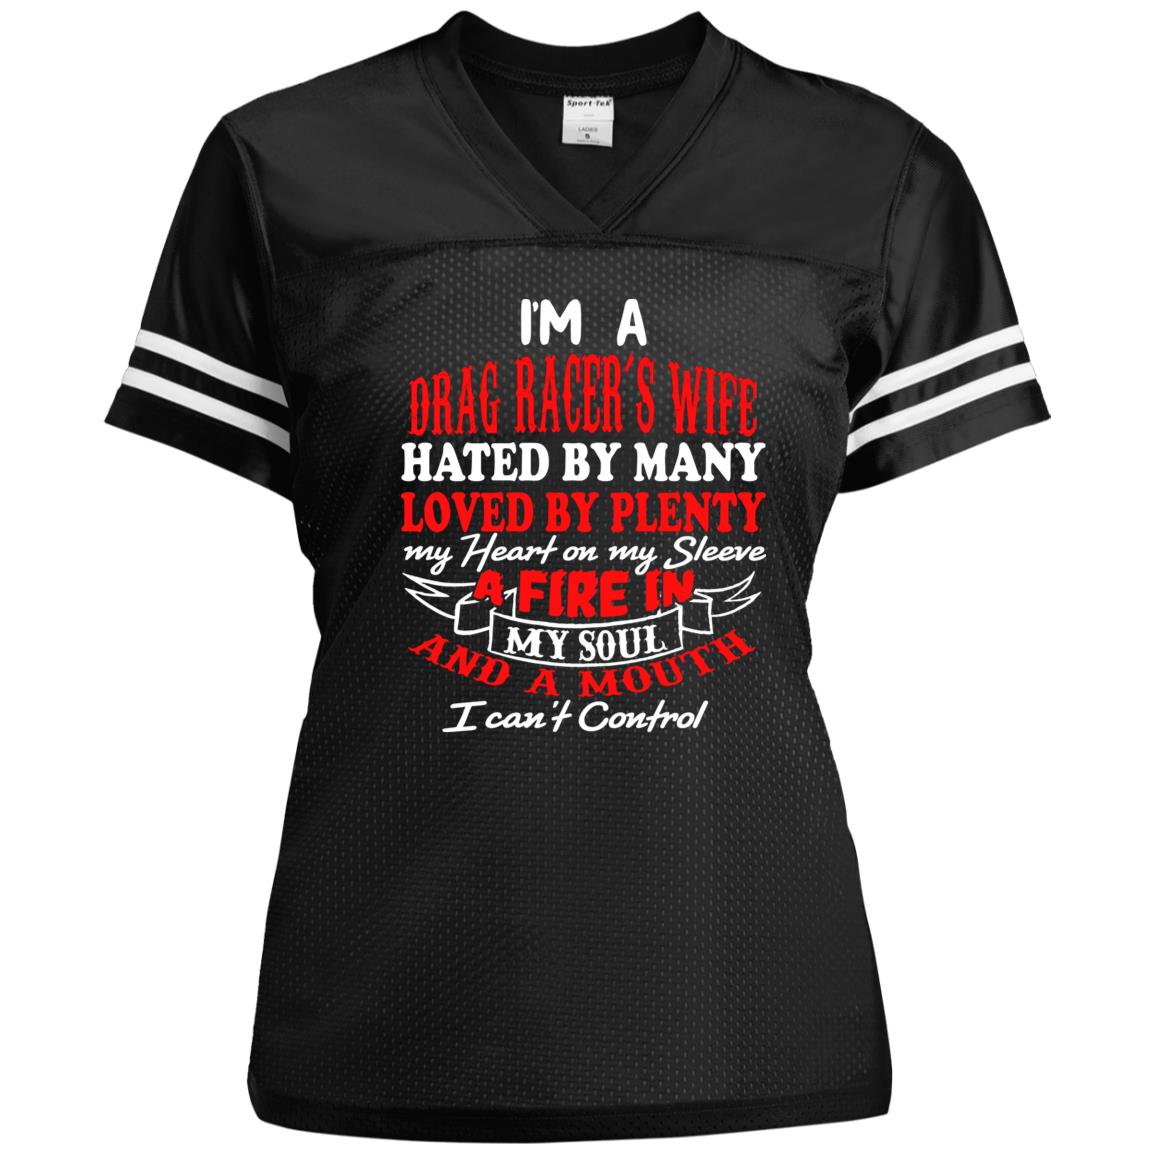 I'm A Drag Racer's Wife Hated By Many Loved By Plenty Ladies' Replica Jersey